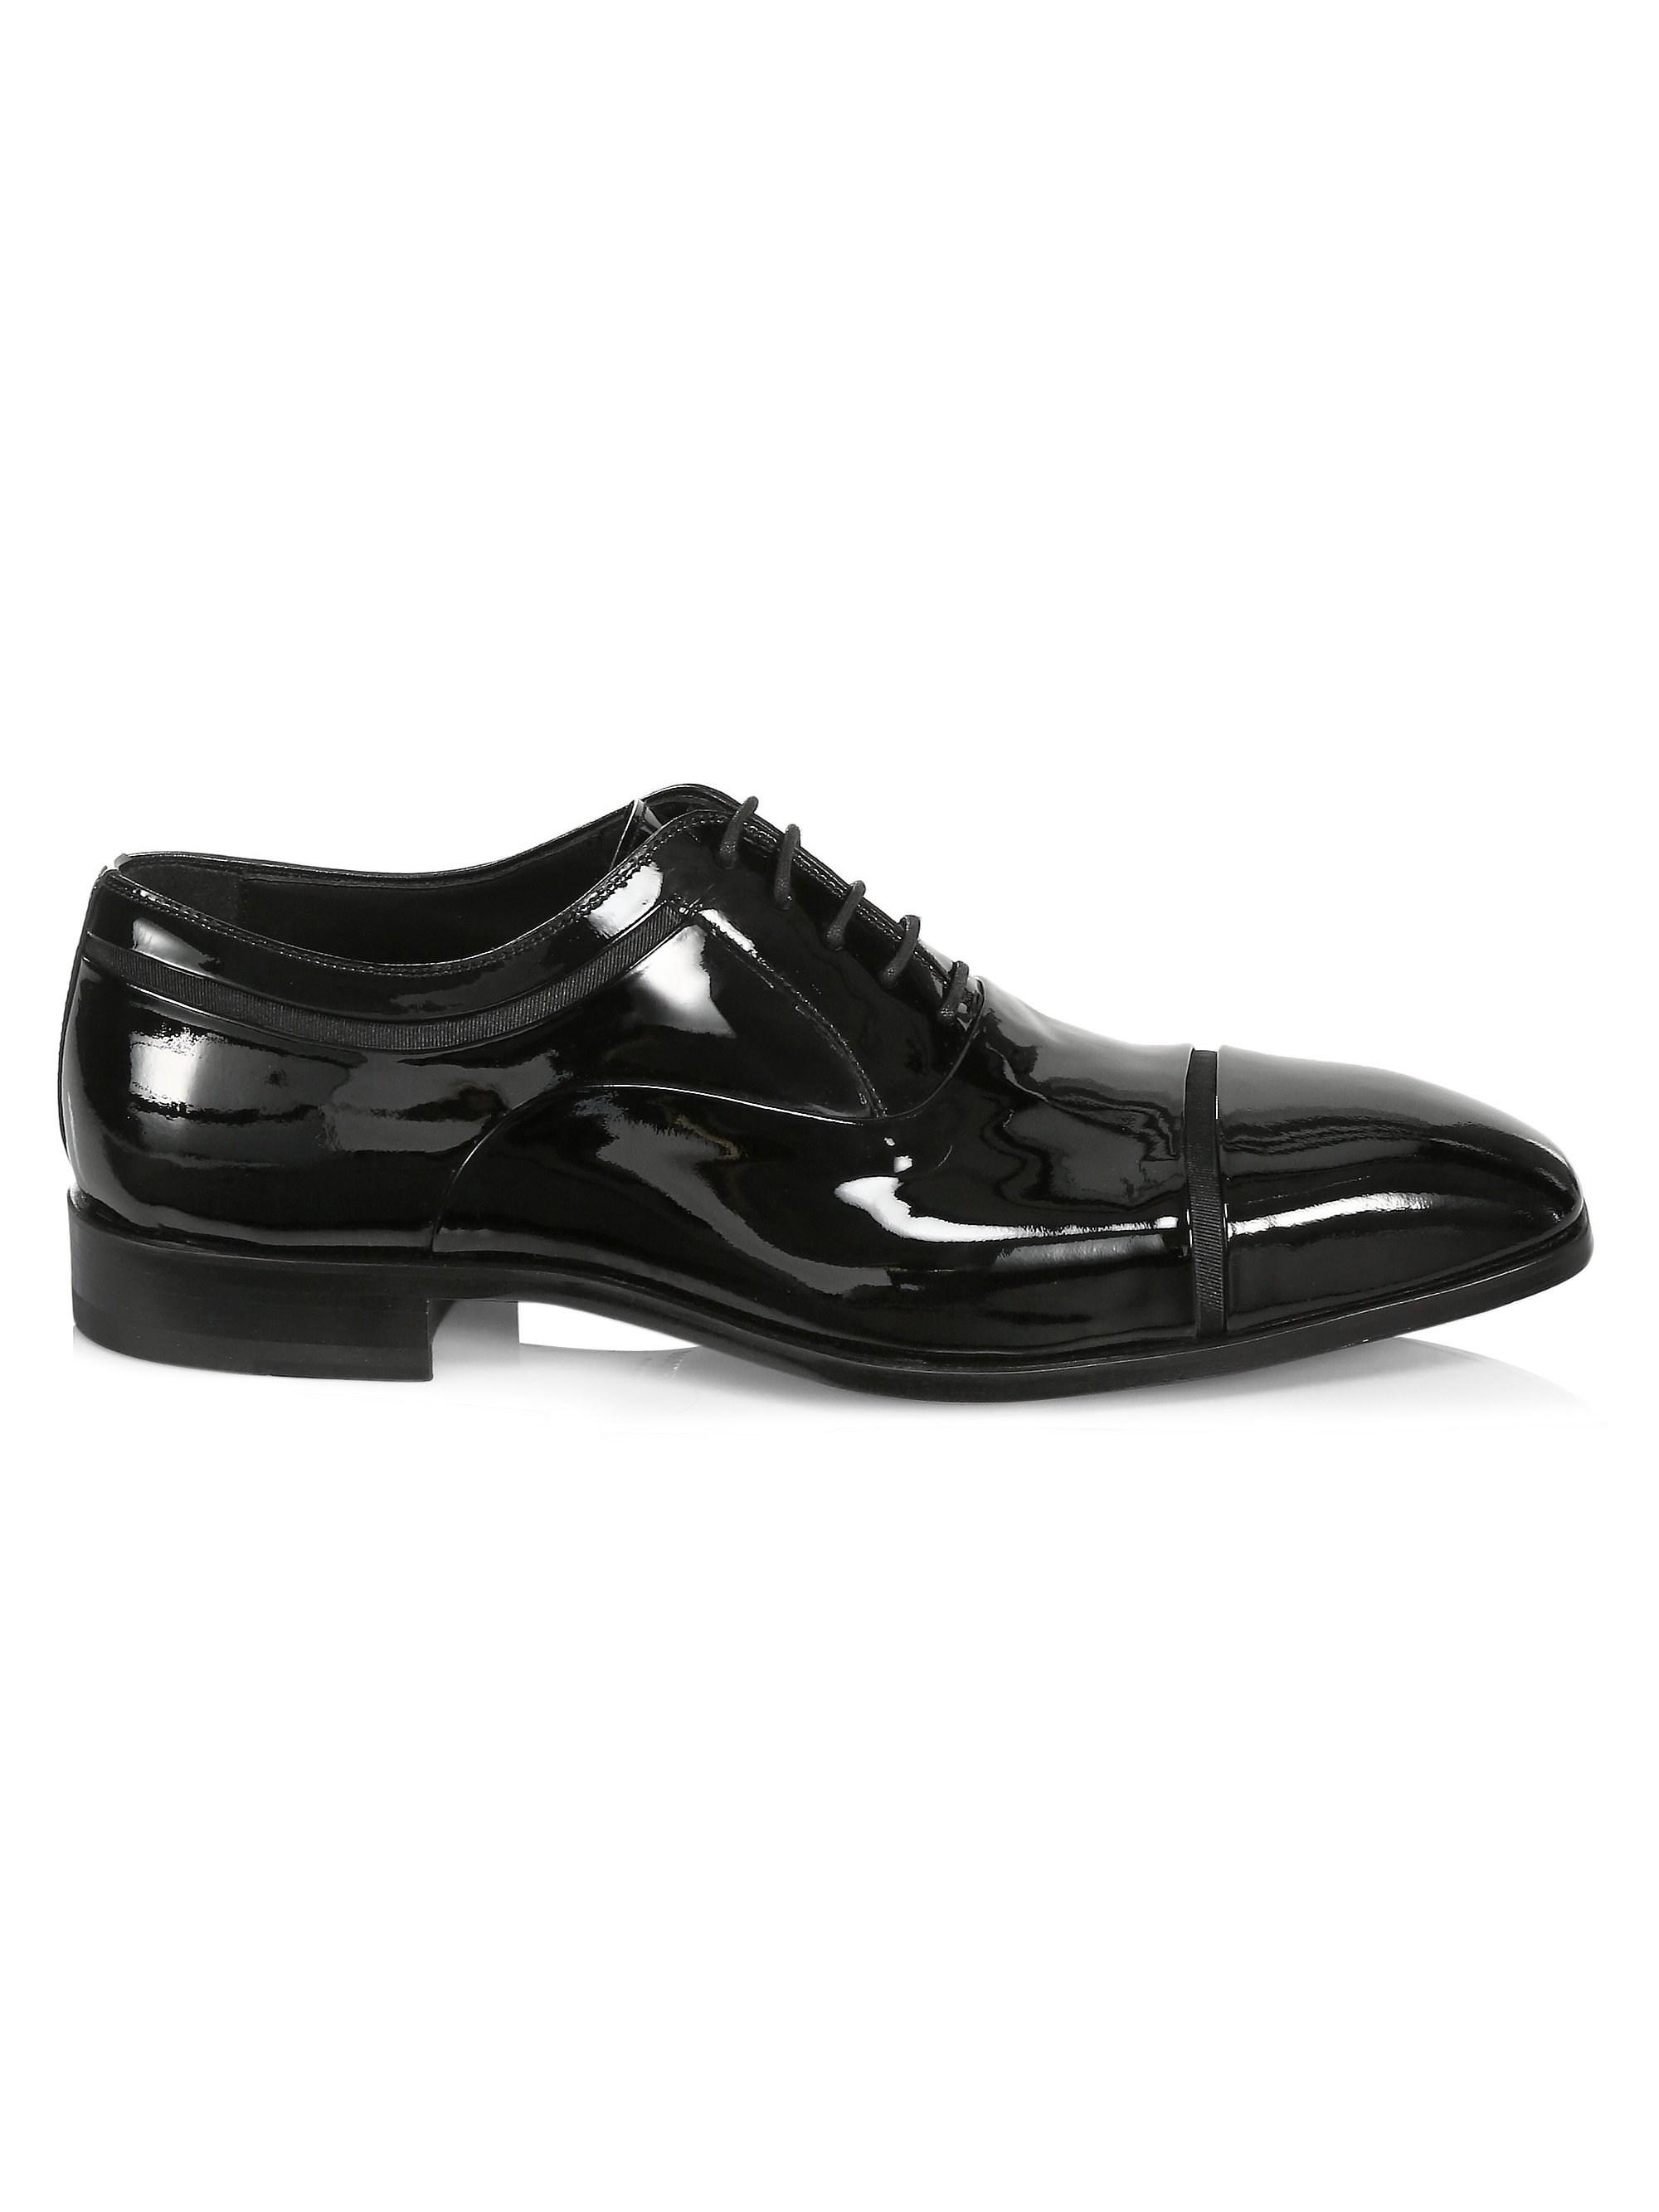 Saks Fifth Avenue Collection Patent Leather Dress Shoes in Black for ...